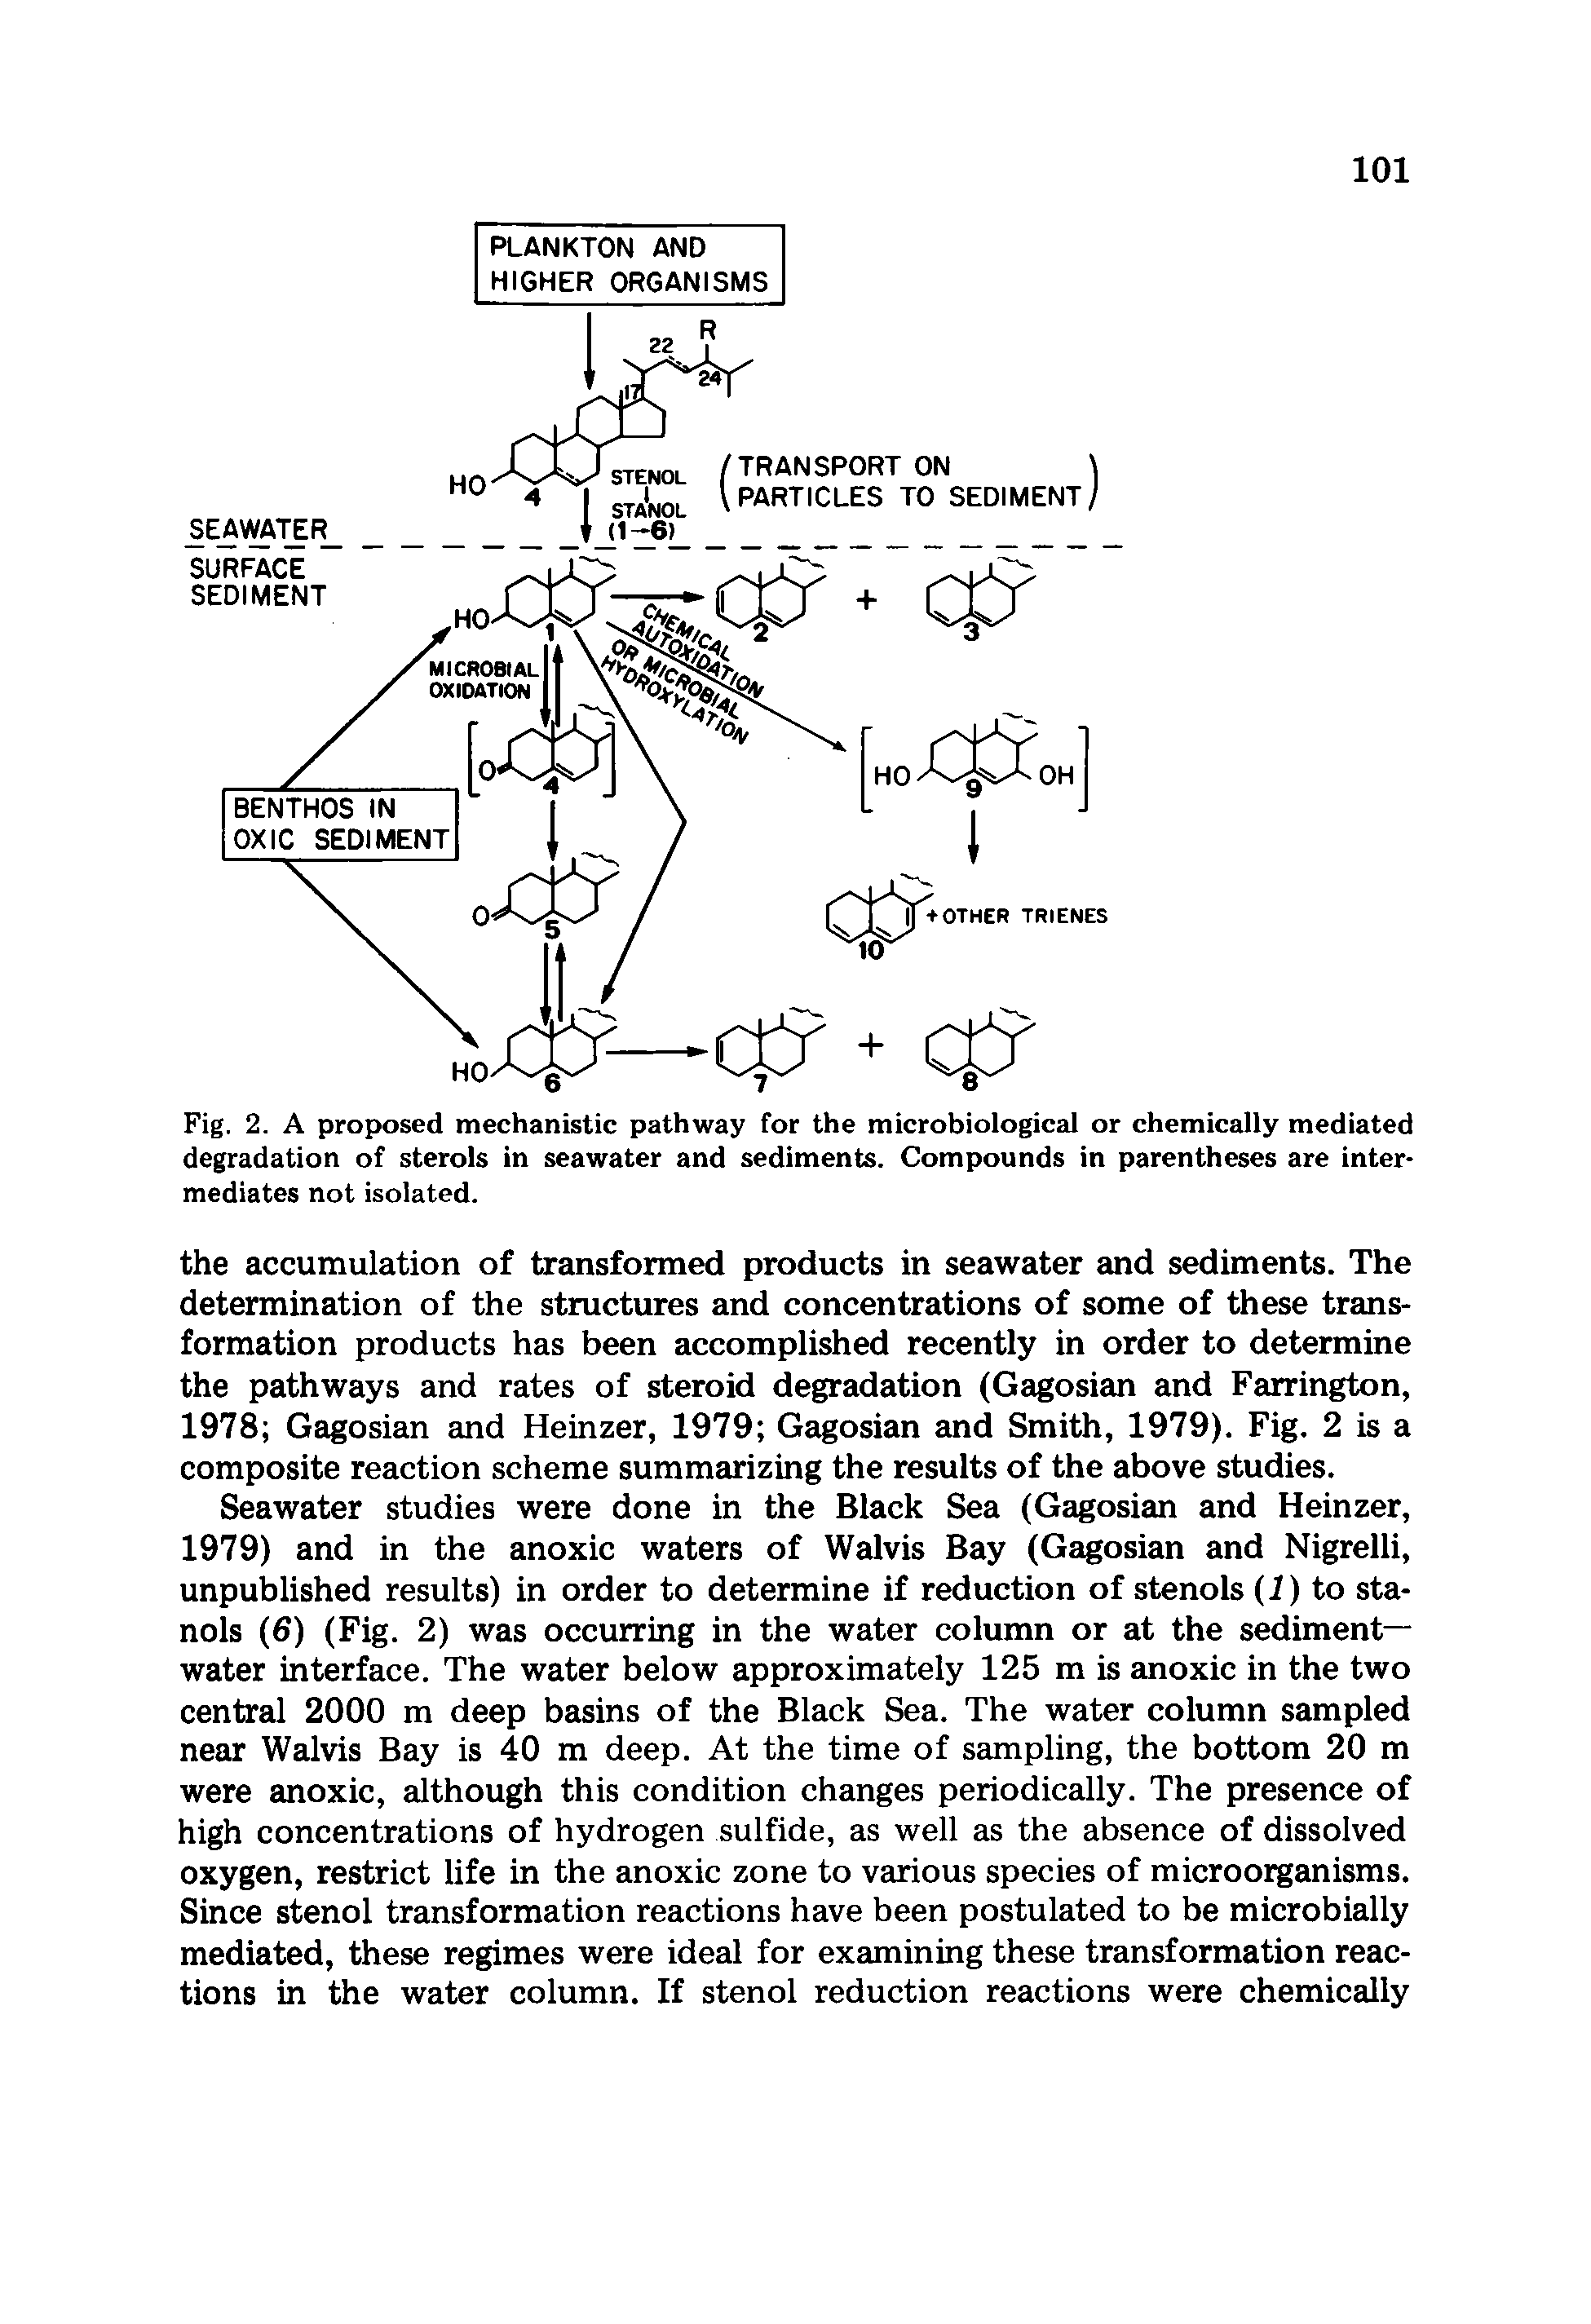 Fig. 2. A proposed mechanistic pathway for the microbiological or chemically mediated degradation of sterols in seawater and sediments. Compounds in parentheses are intermediates not isolated.